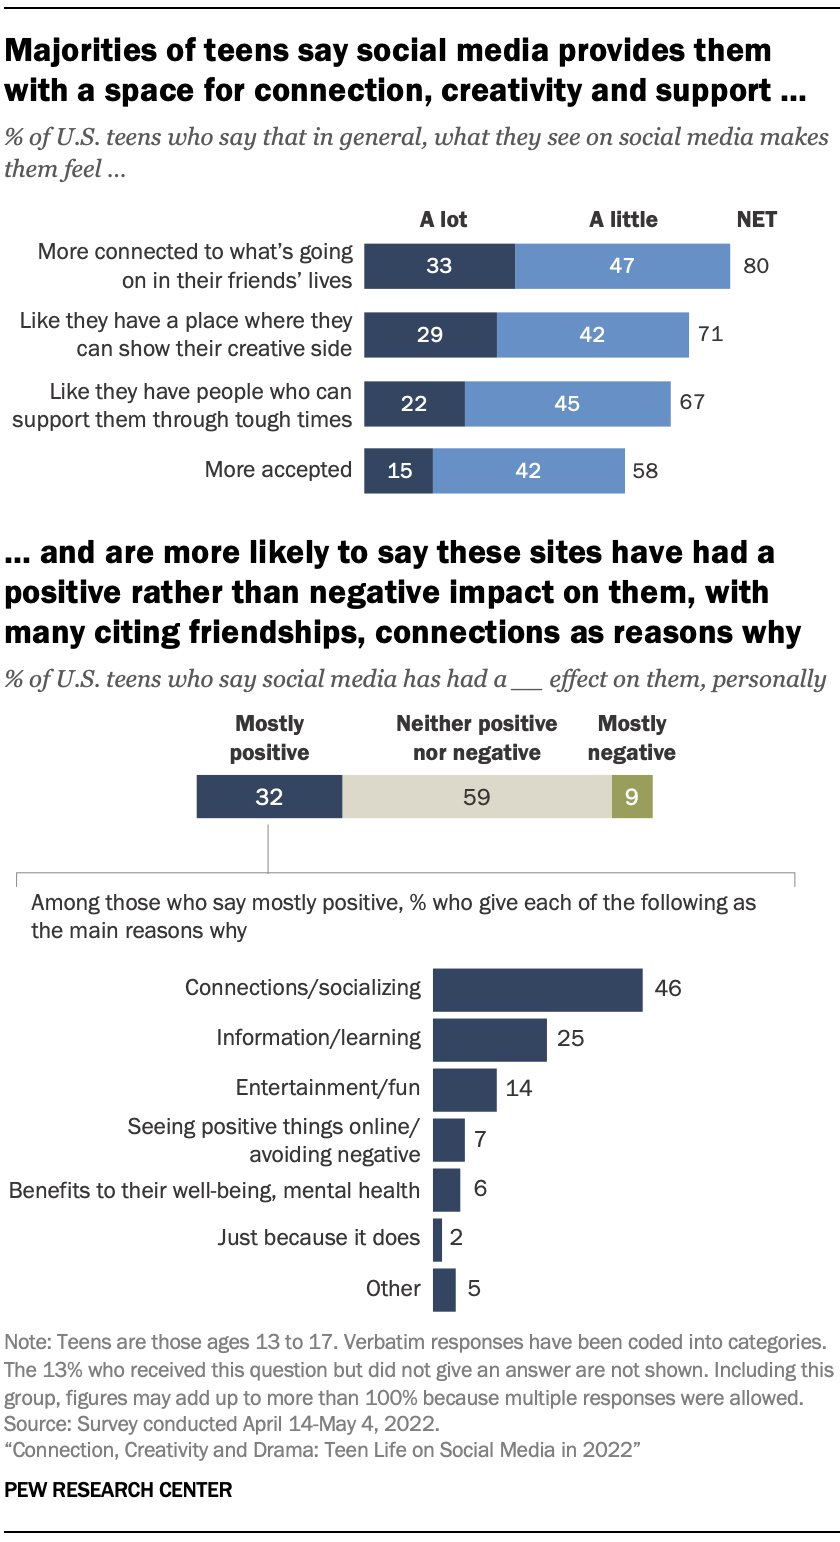 Teen Life on Social Media in 2022 Connection, Creativity and Drama